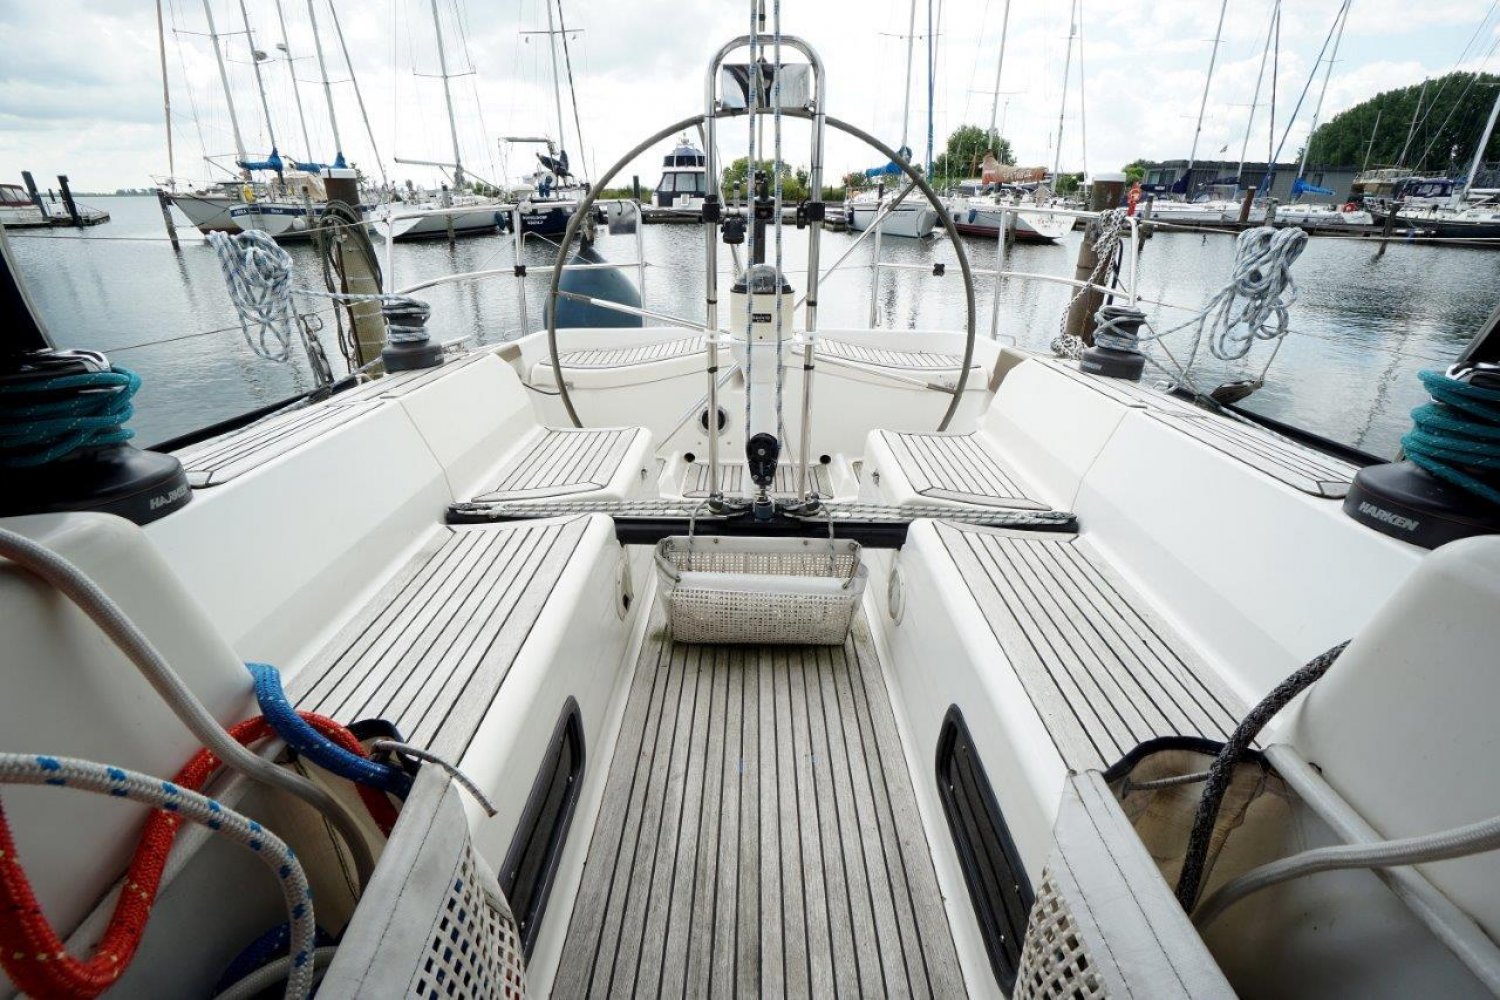 x 412 sailboat for sale